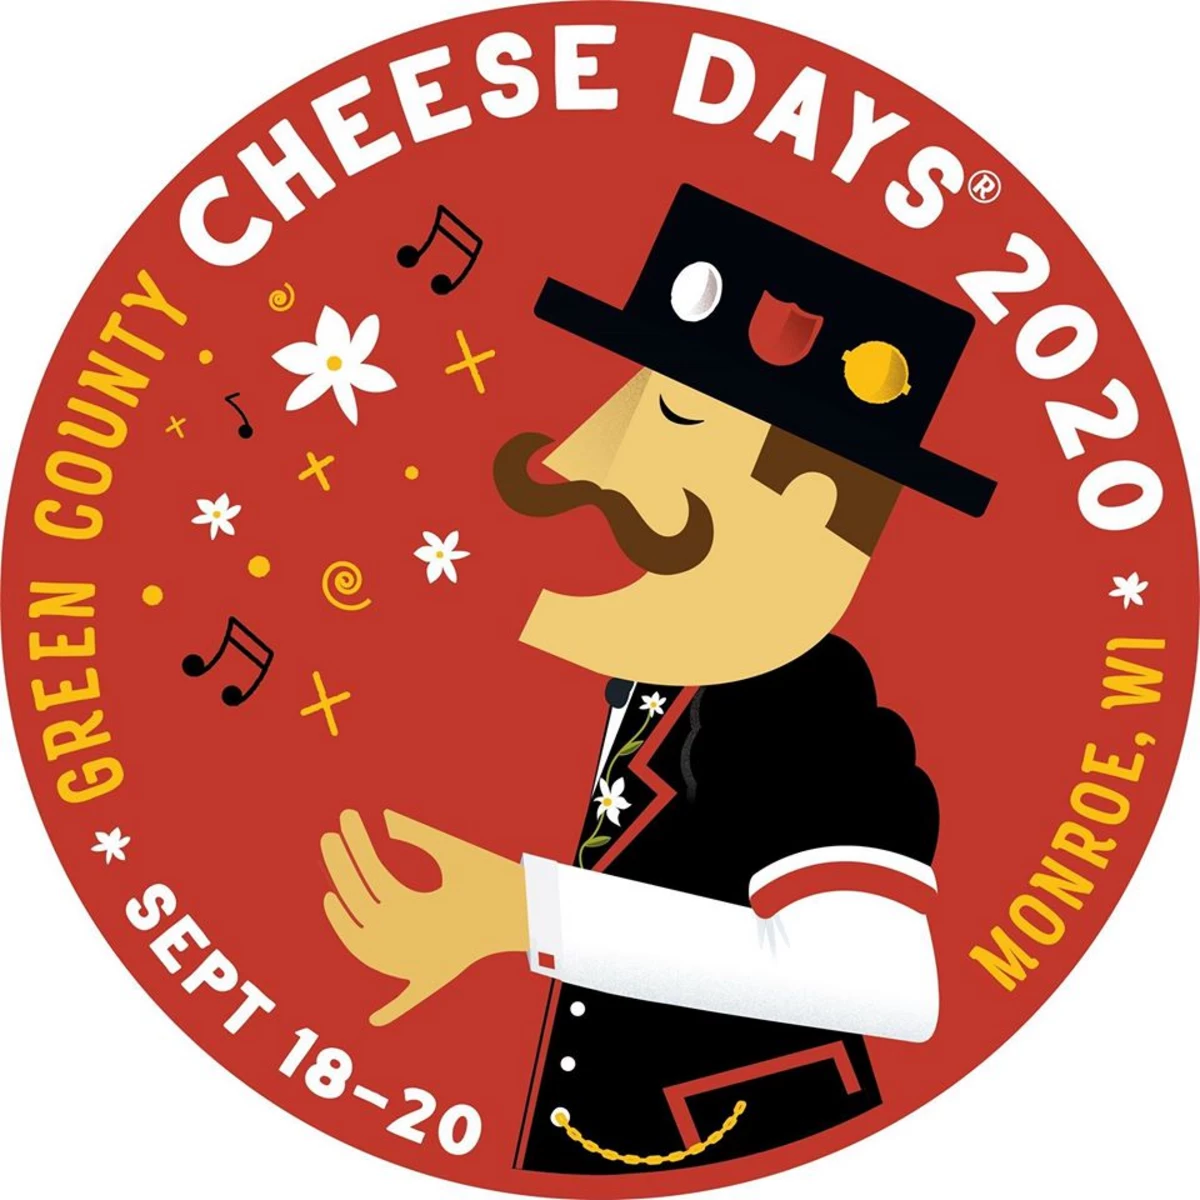 Monroe Cheese Days Cancelled for 2020, But There's A Bright Side